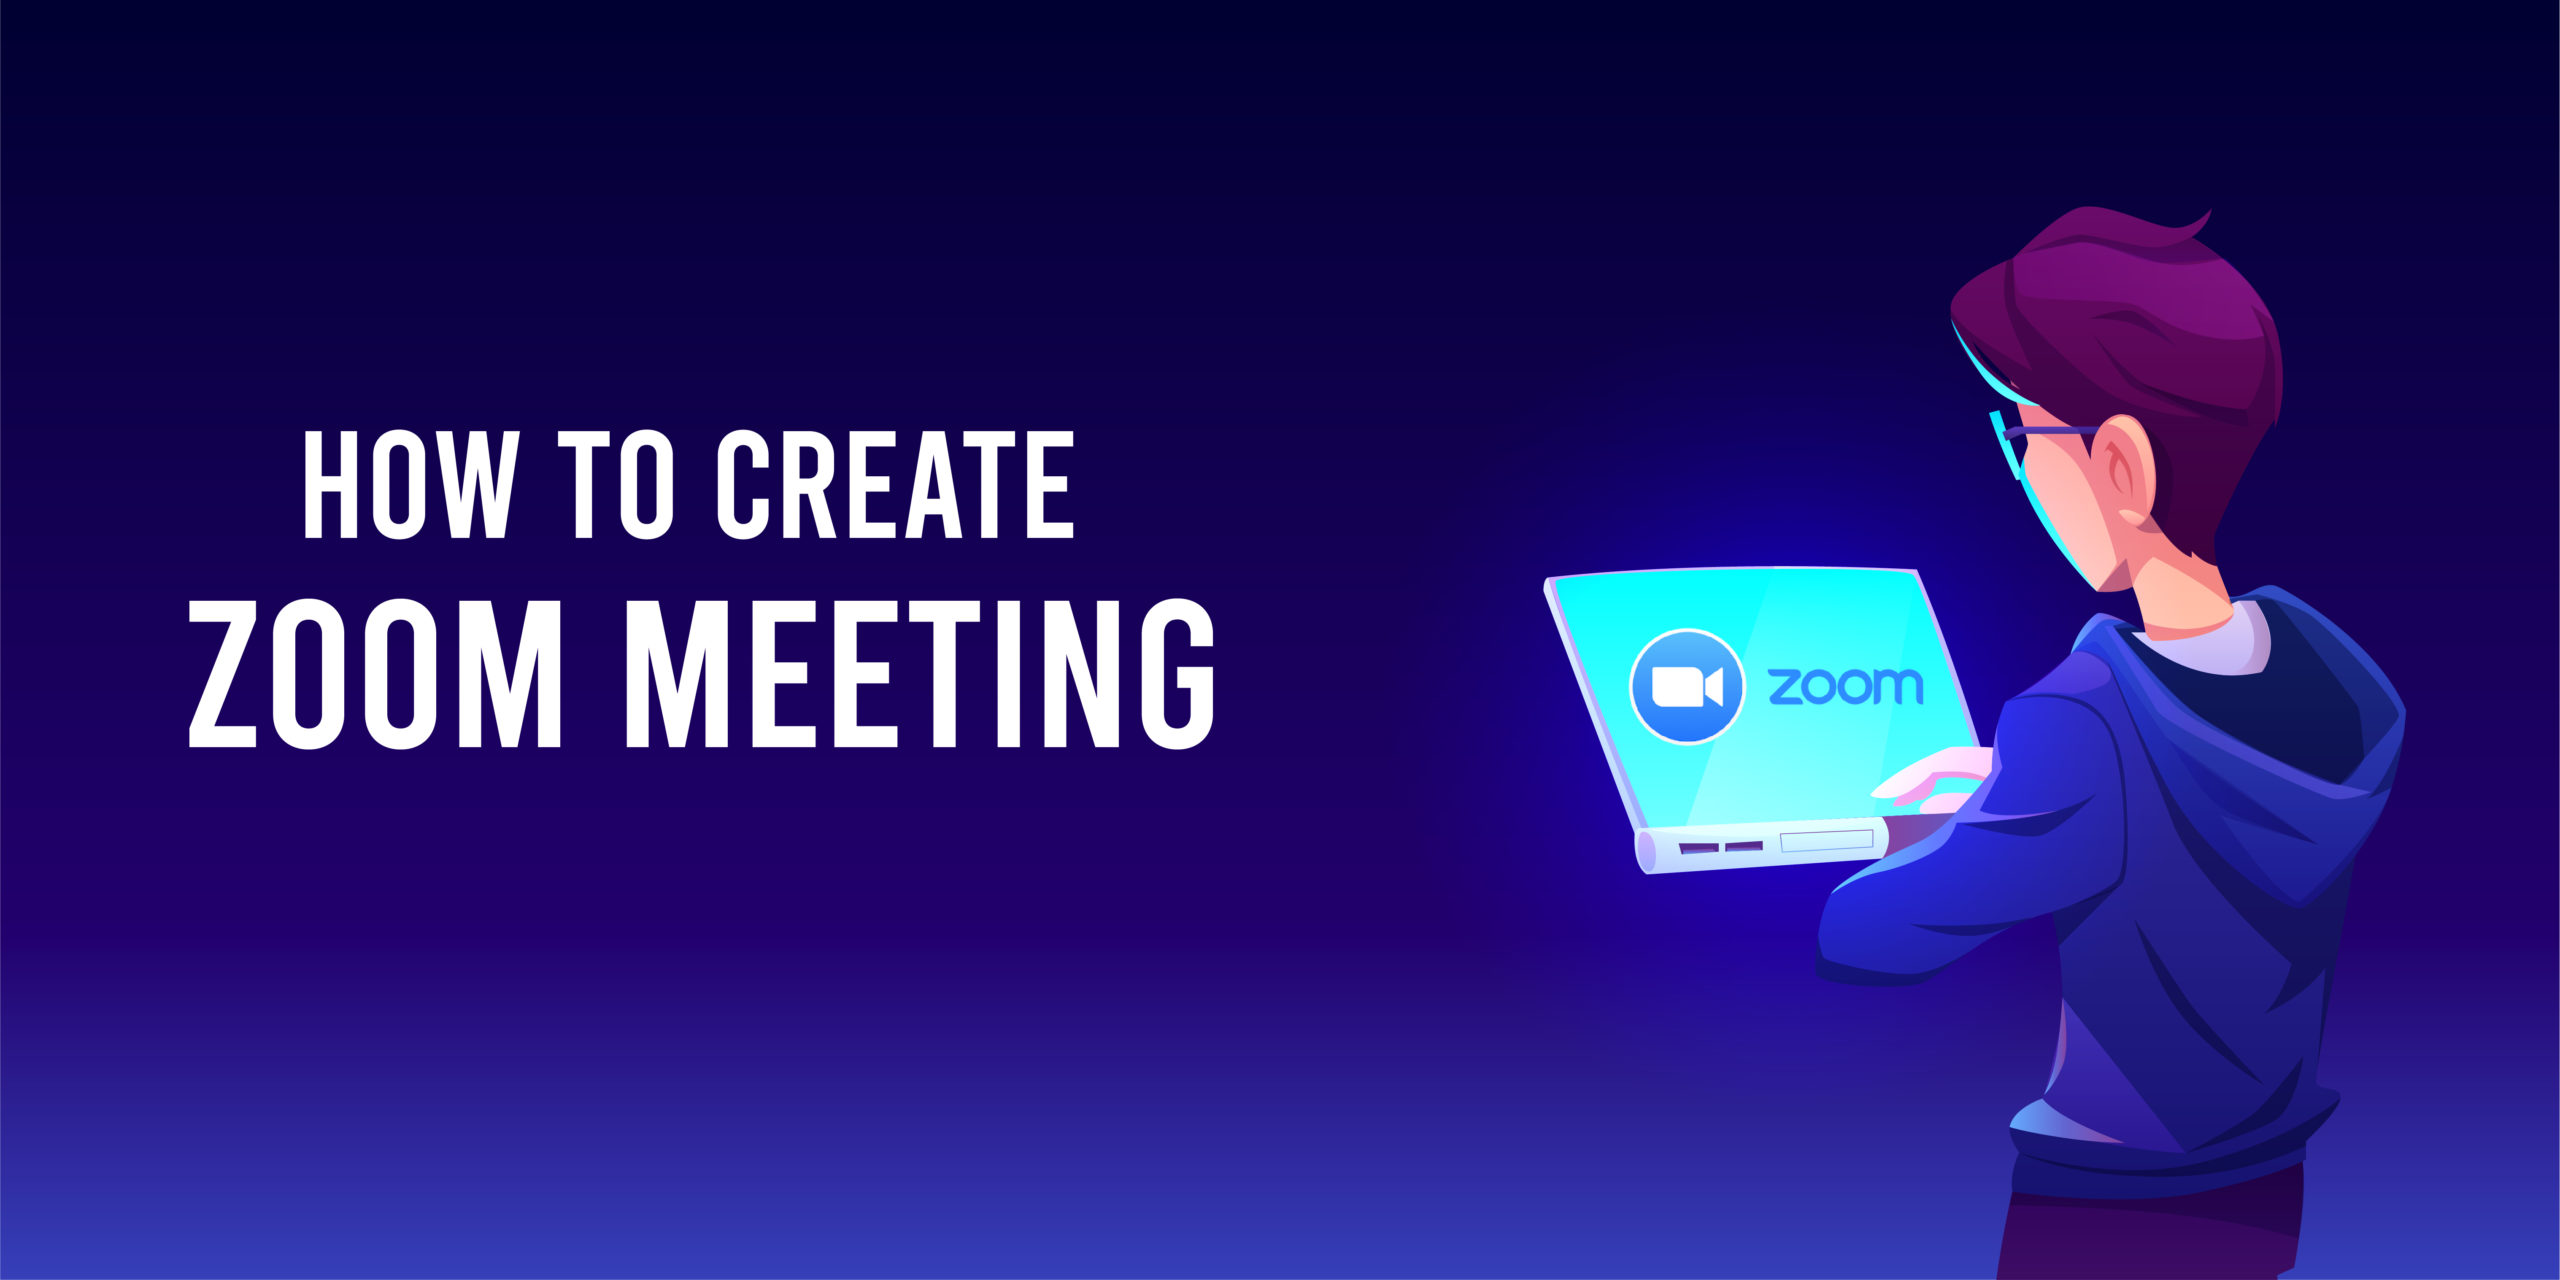 can you create a zoom meeting for free